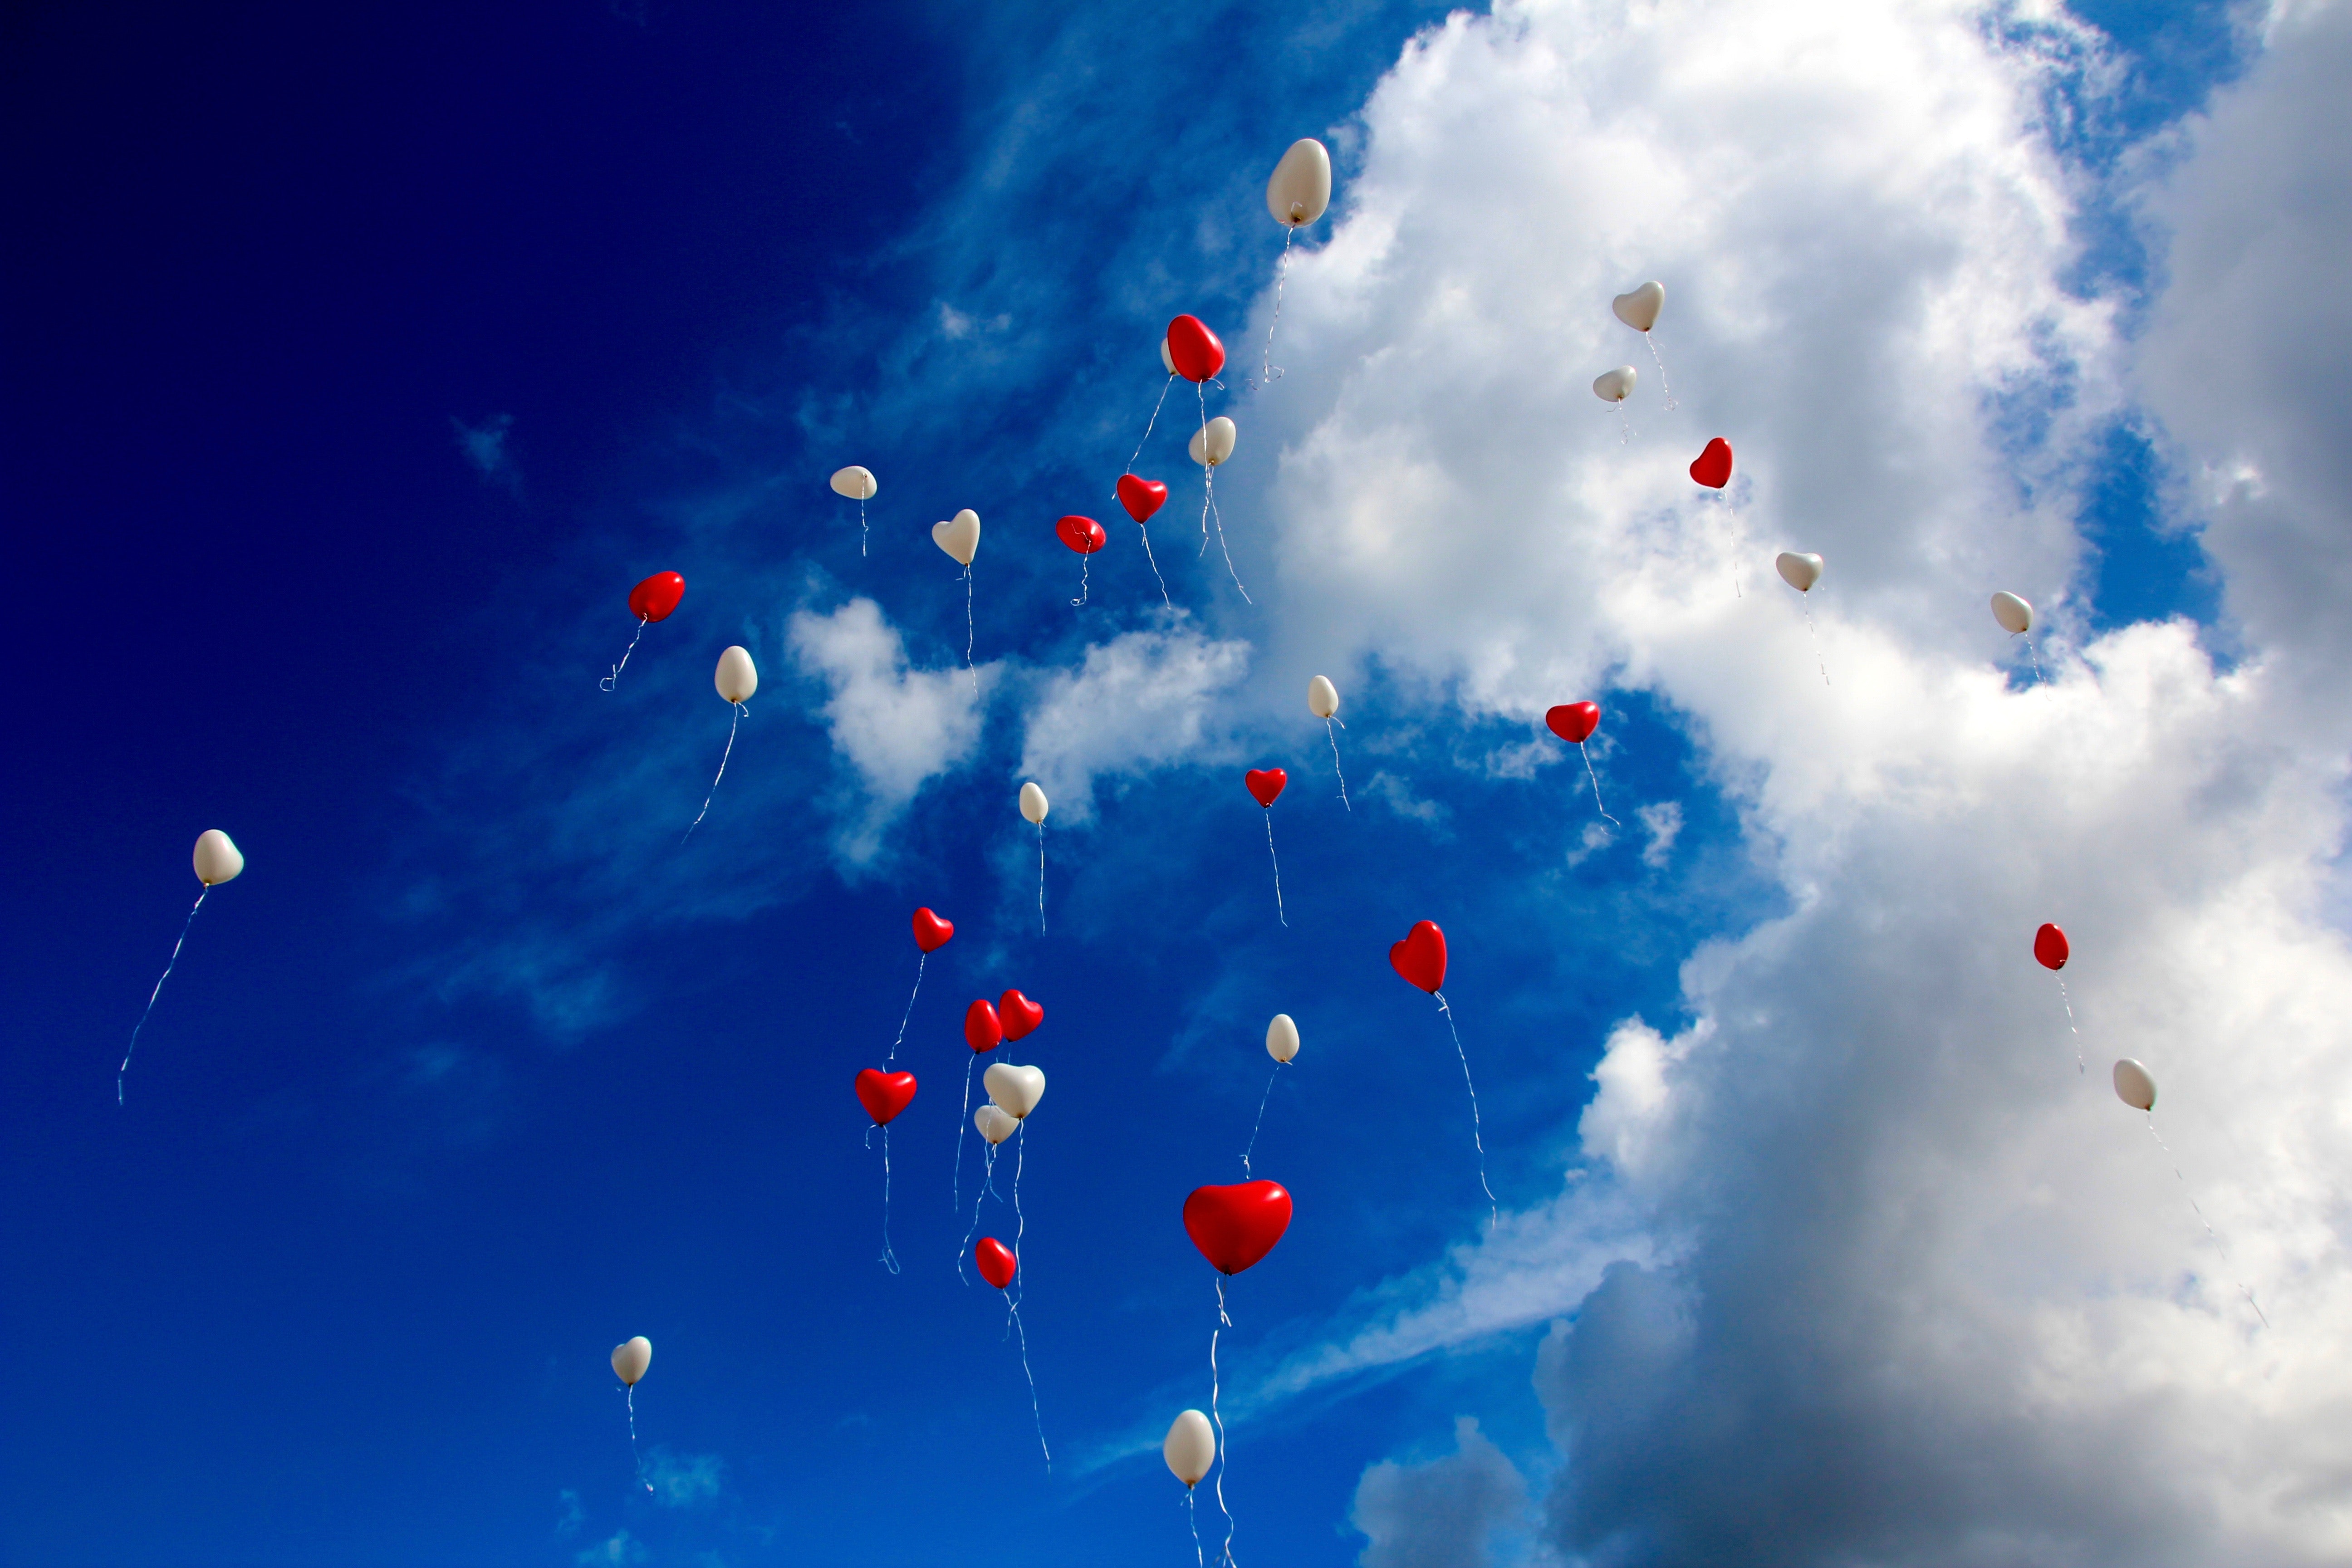 White and red plastic heart balloon on sky during daytime photo